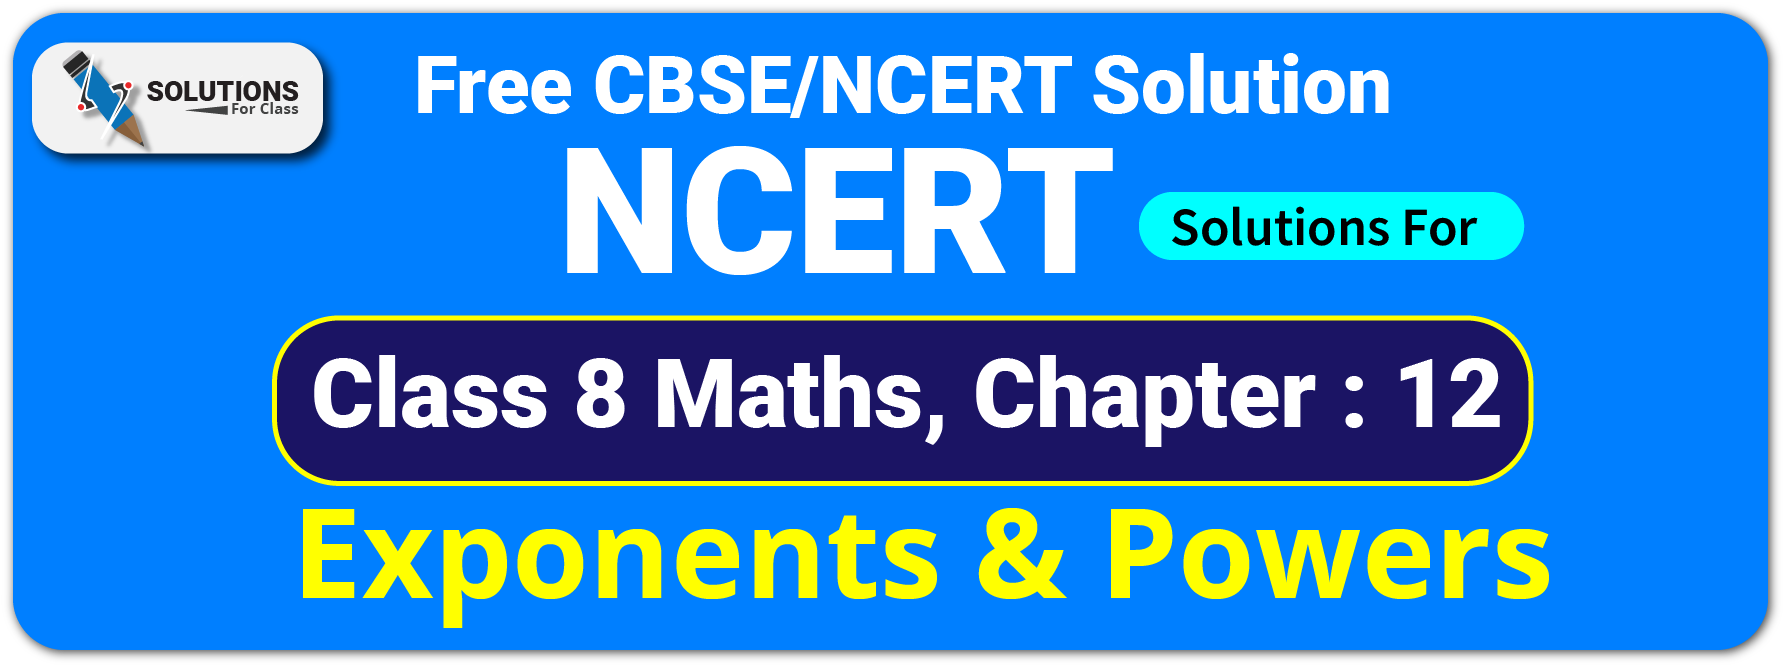 NCERT Solutions For Class 8 Chapter 12, Exponents and Powers